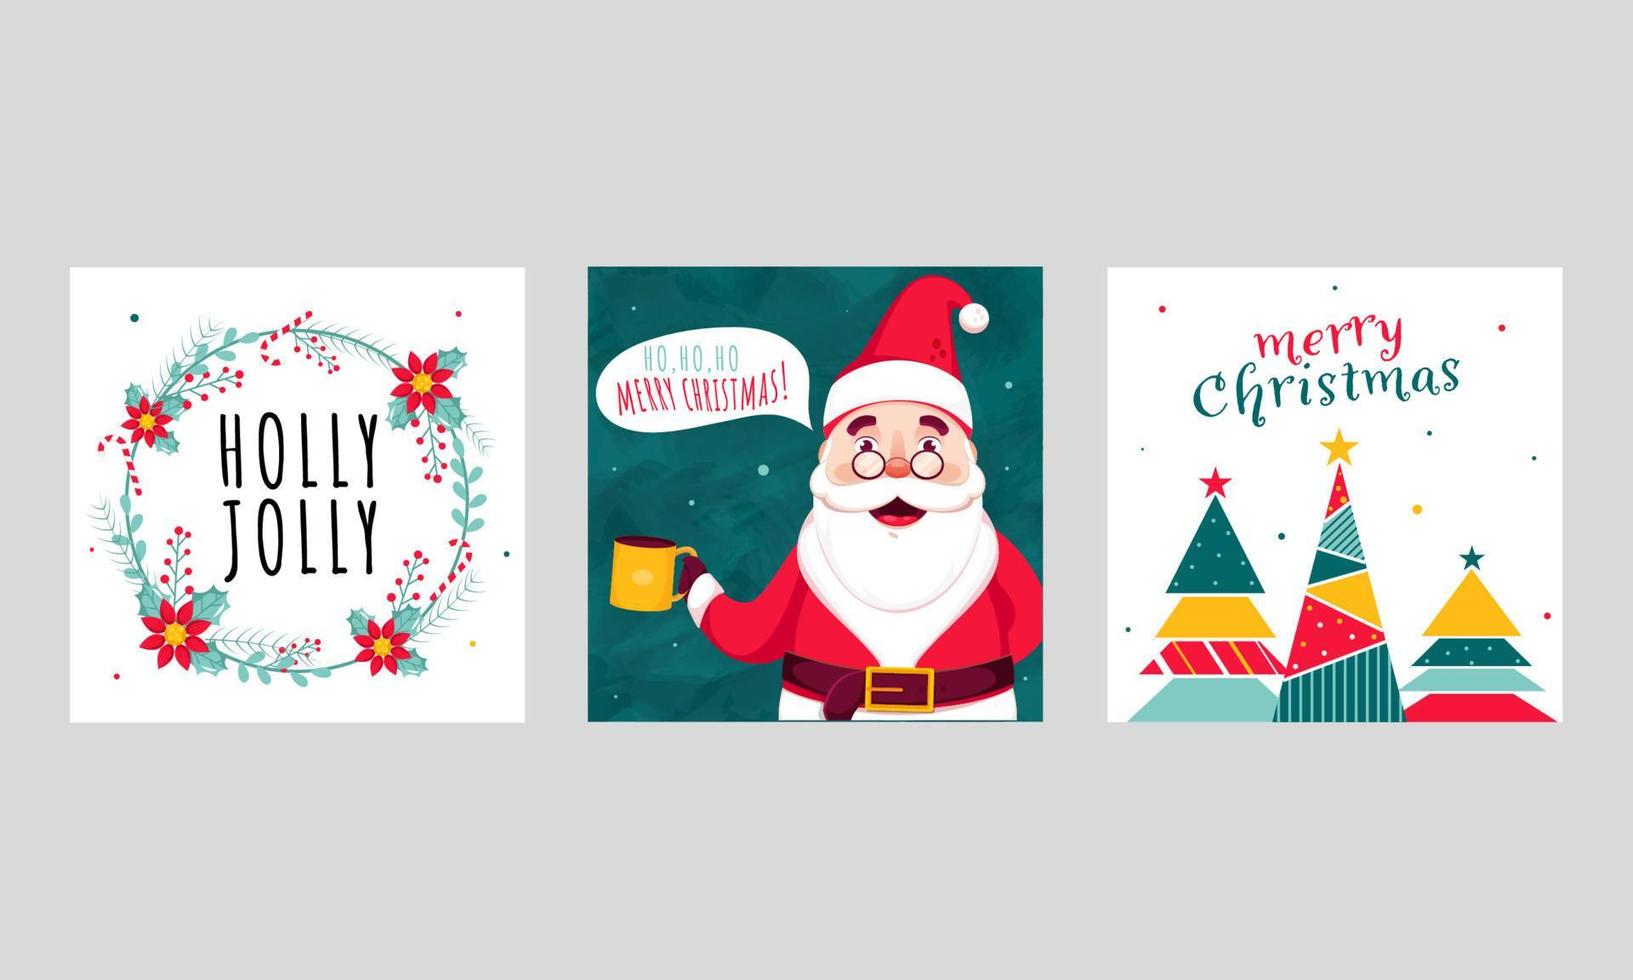 Merry Christmas and Holly Jolly Poster Design with Floral Wreath, Xmas Trees and Cartoon Santa Claus Holding Cup. vector